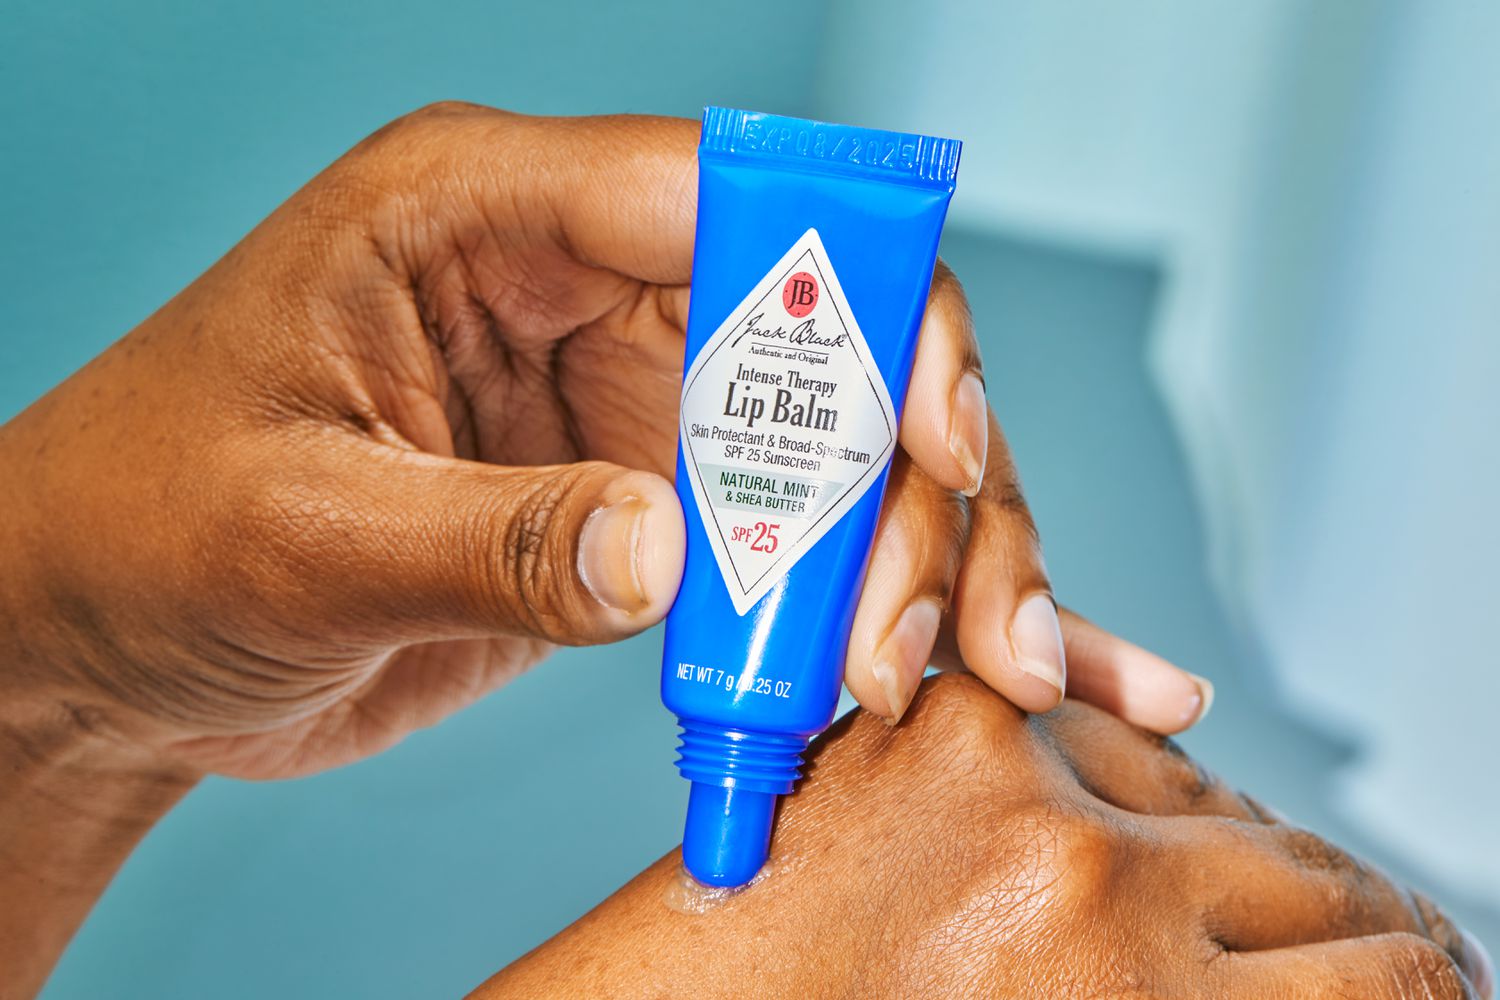 Jack Black Intense Therapy Lip Balm being squeezed onto the back of a hand